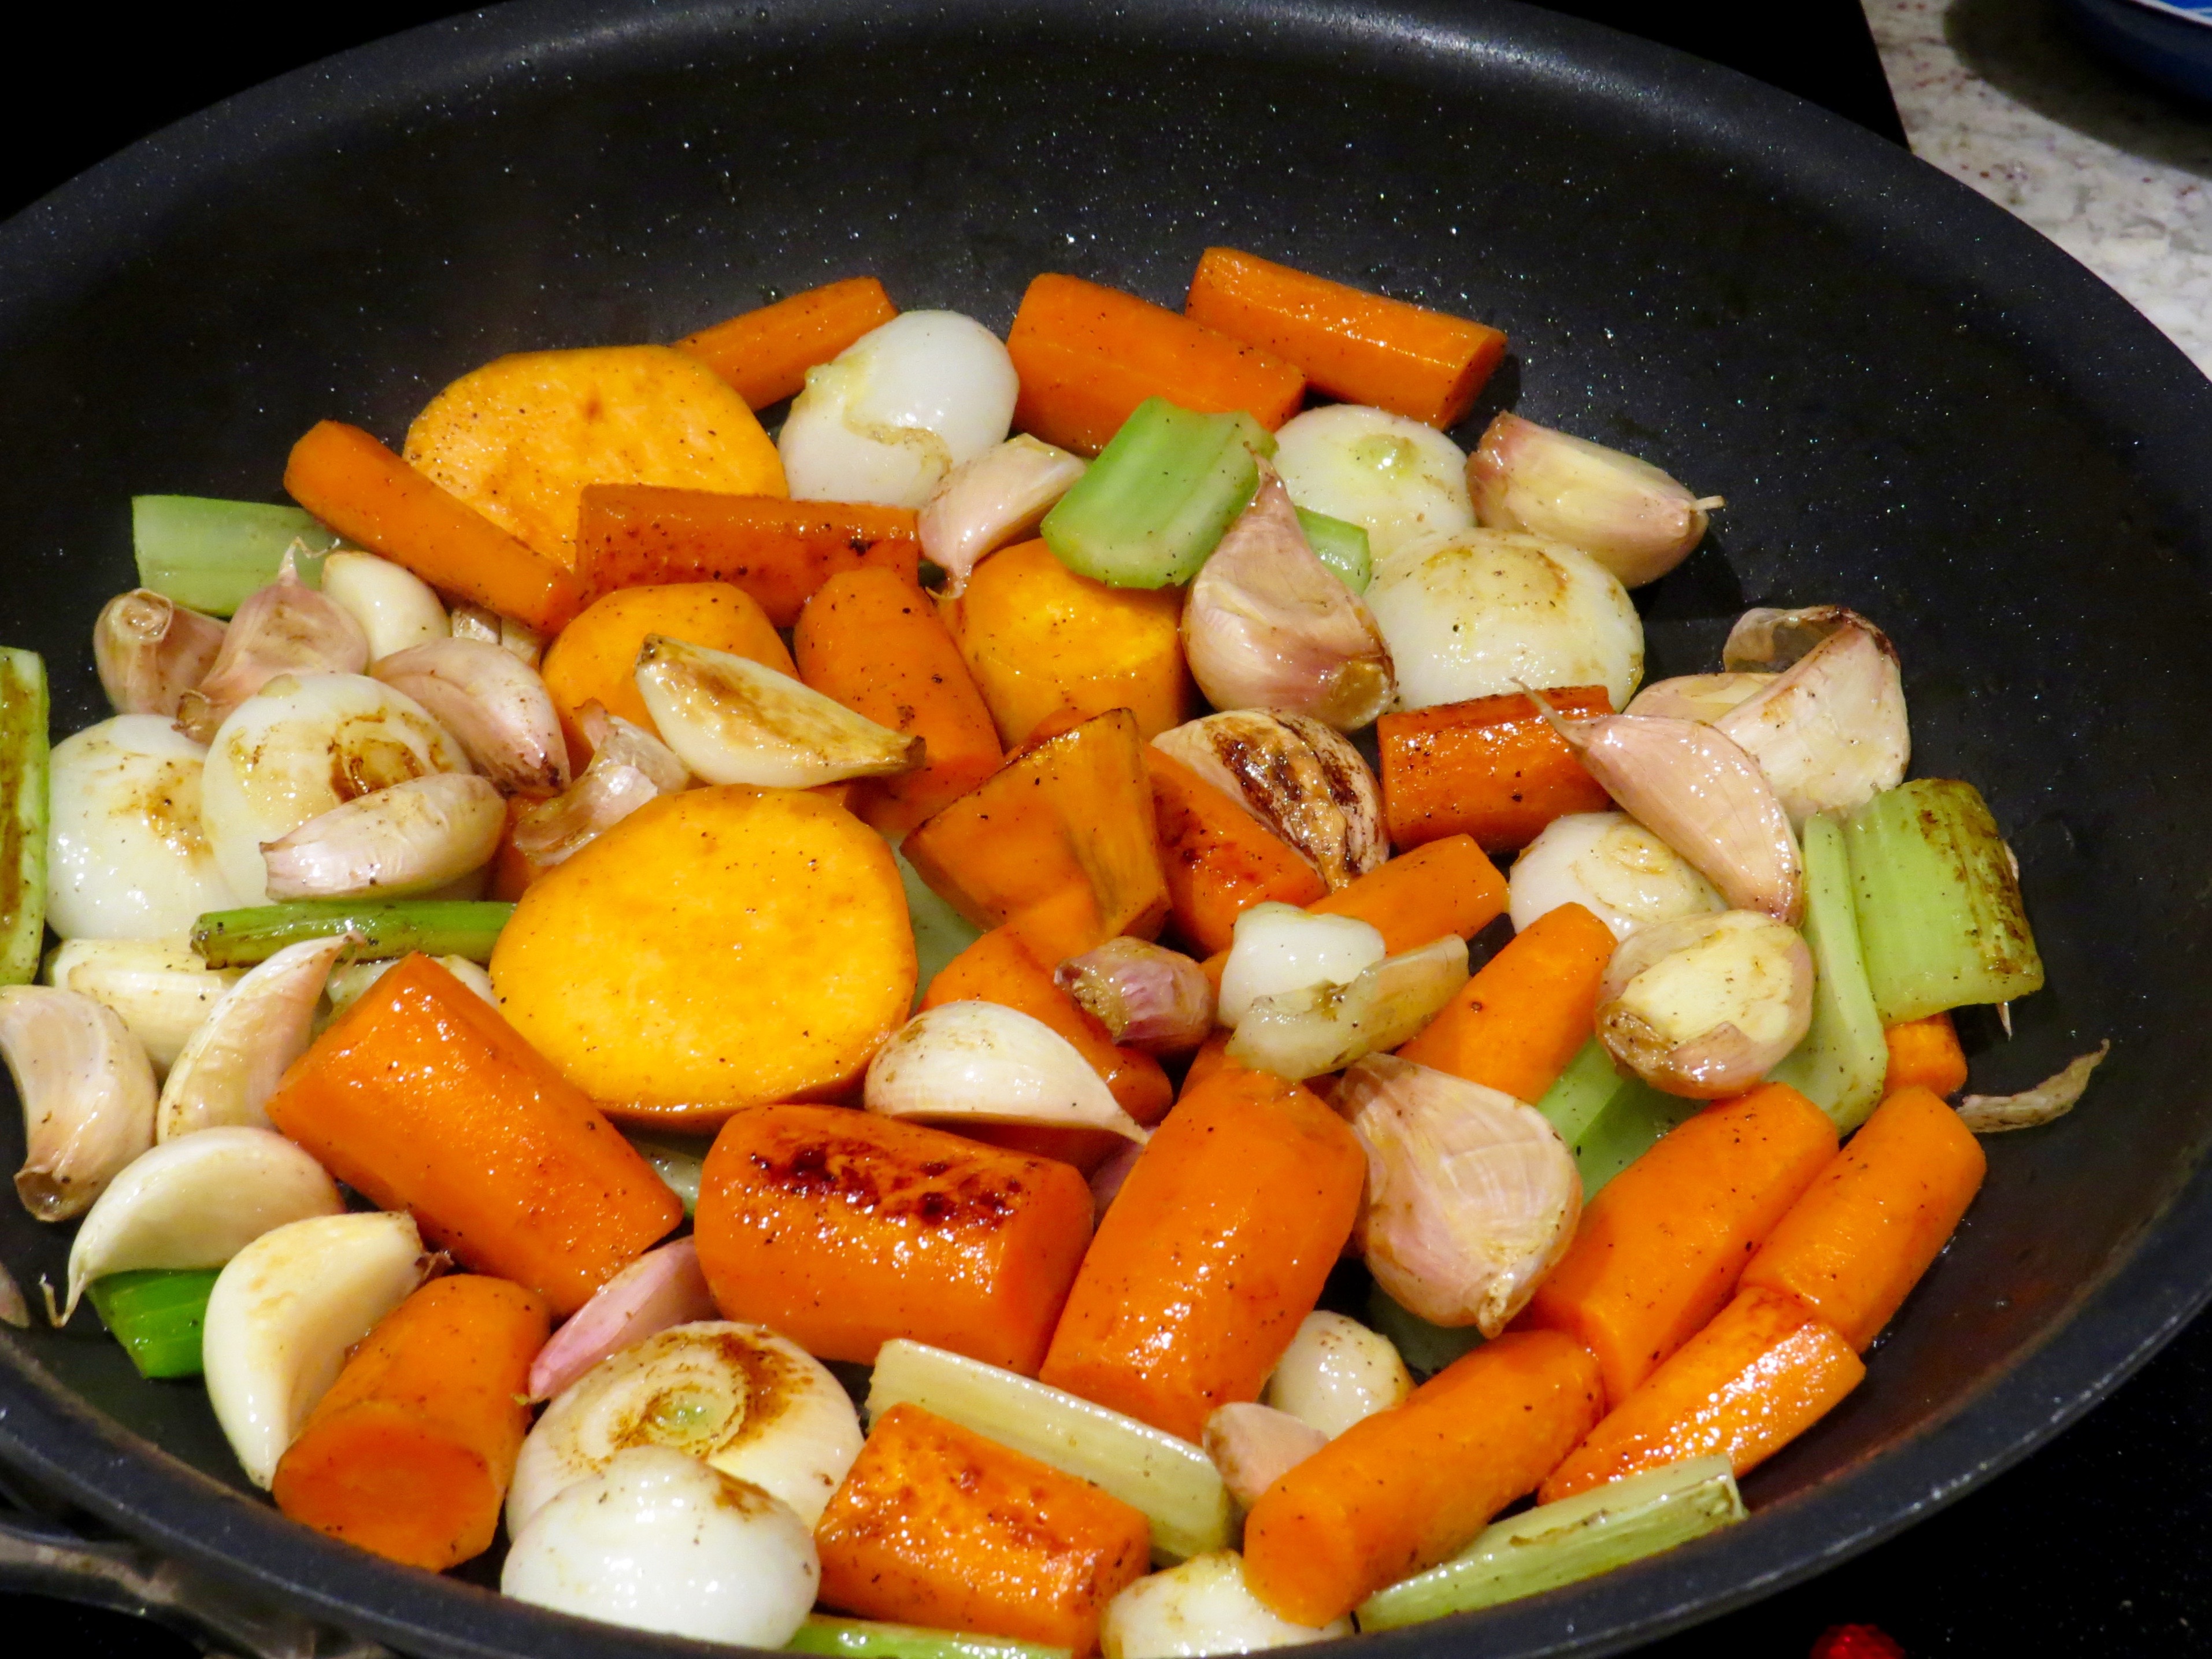 Chicken in a Pot - the veggies are prepared and then tossed in a large skillet for a sauté.